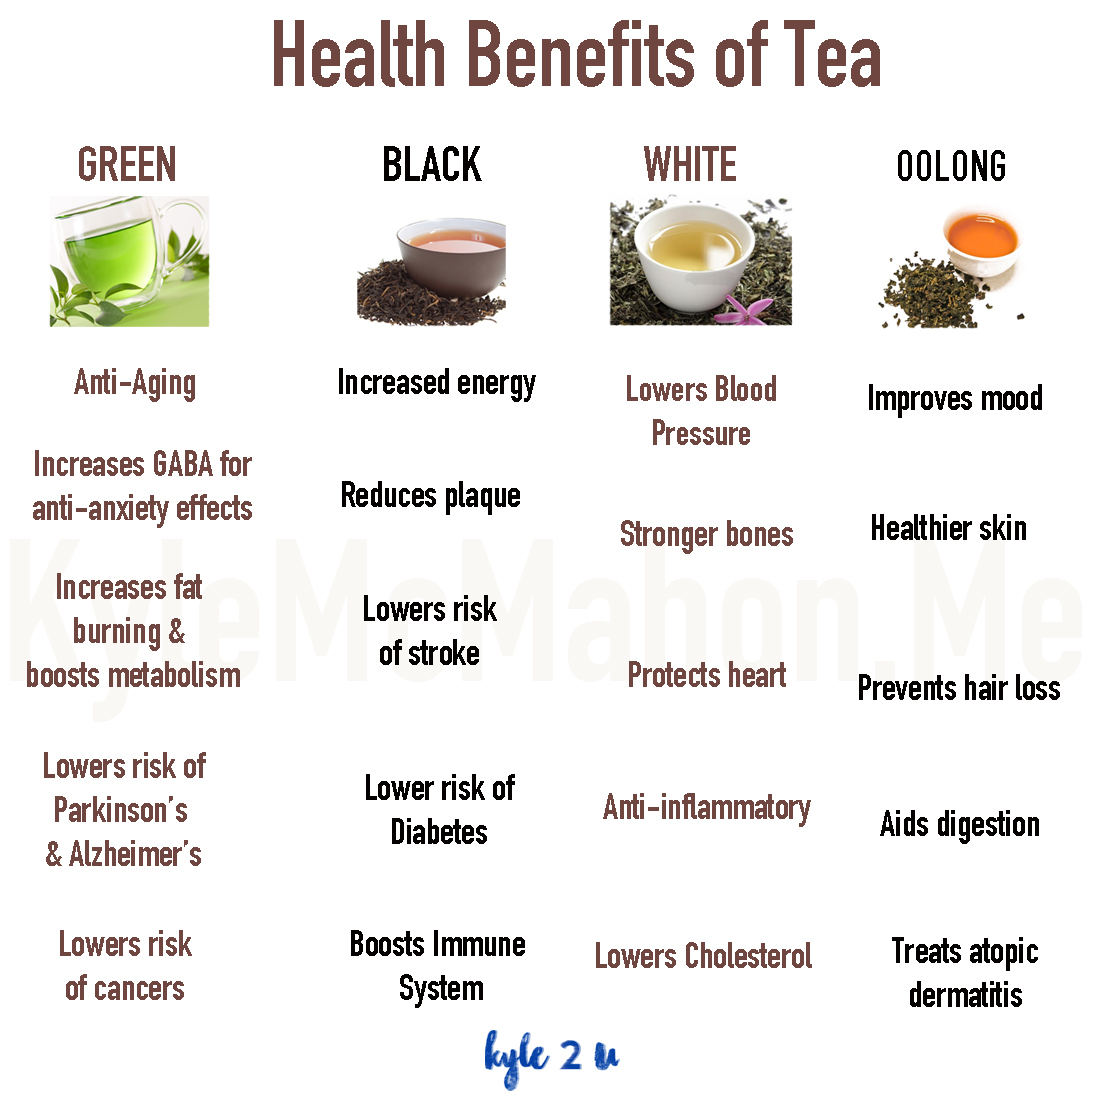 Health benefits of tea including Black, Green White and Oolong